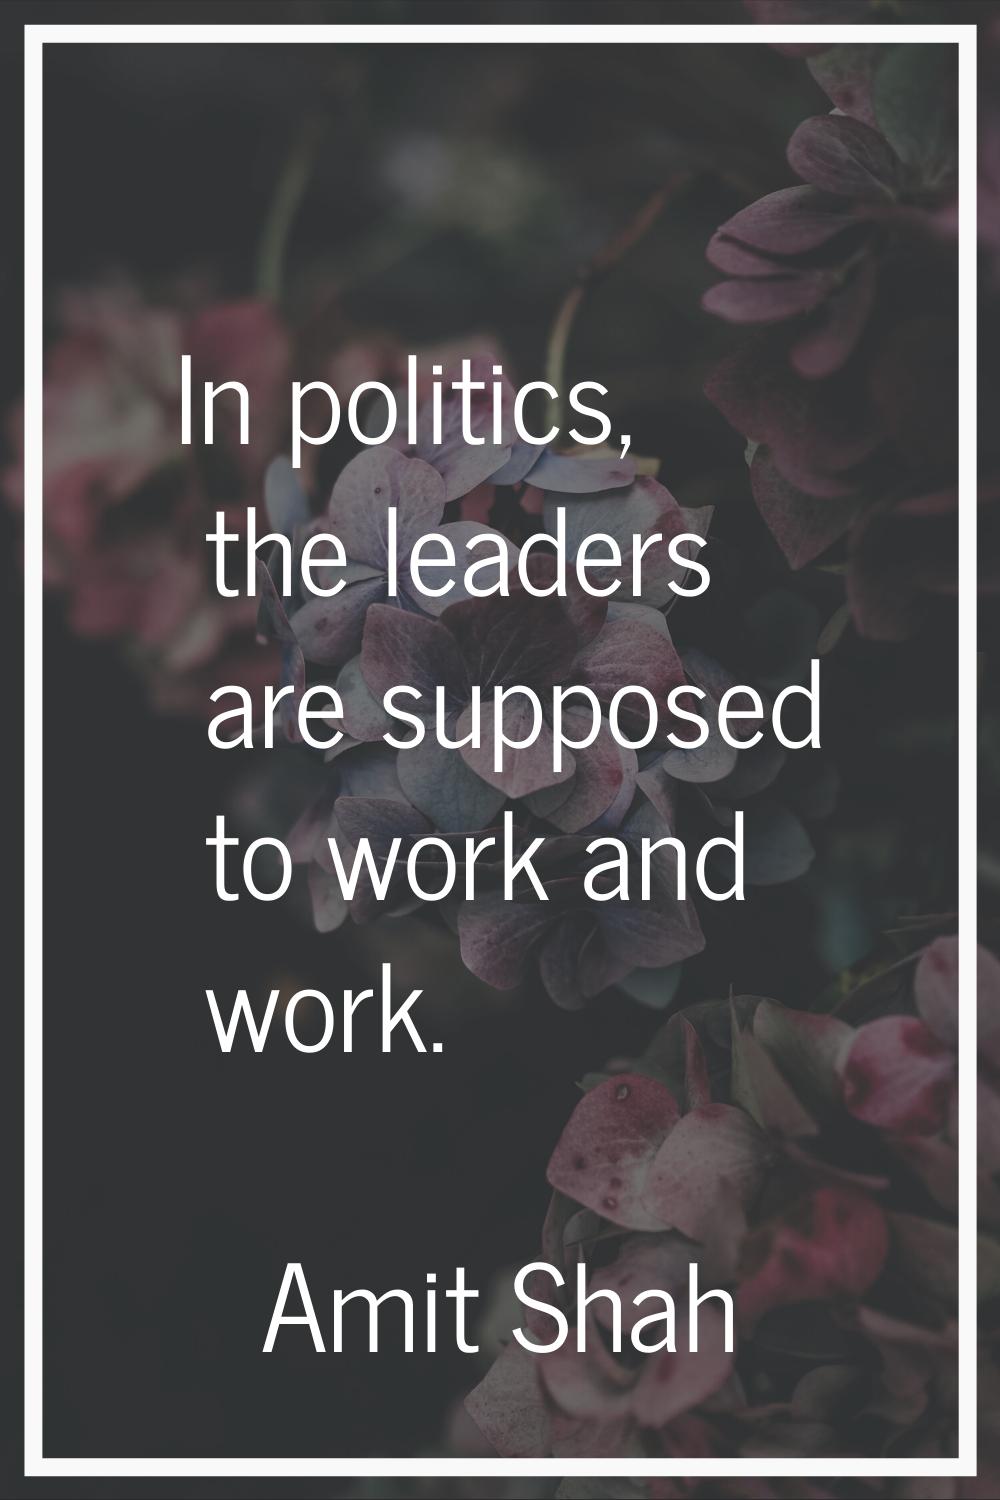 In politics, the leaders are supposed to work and work.